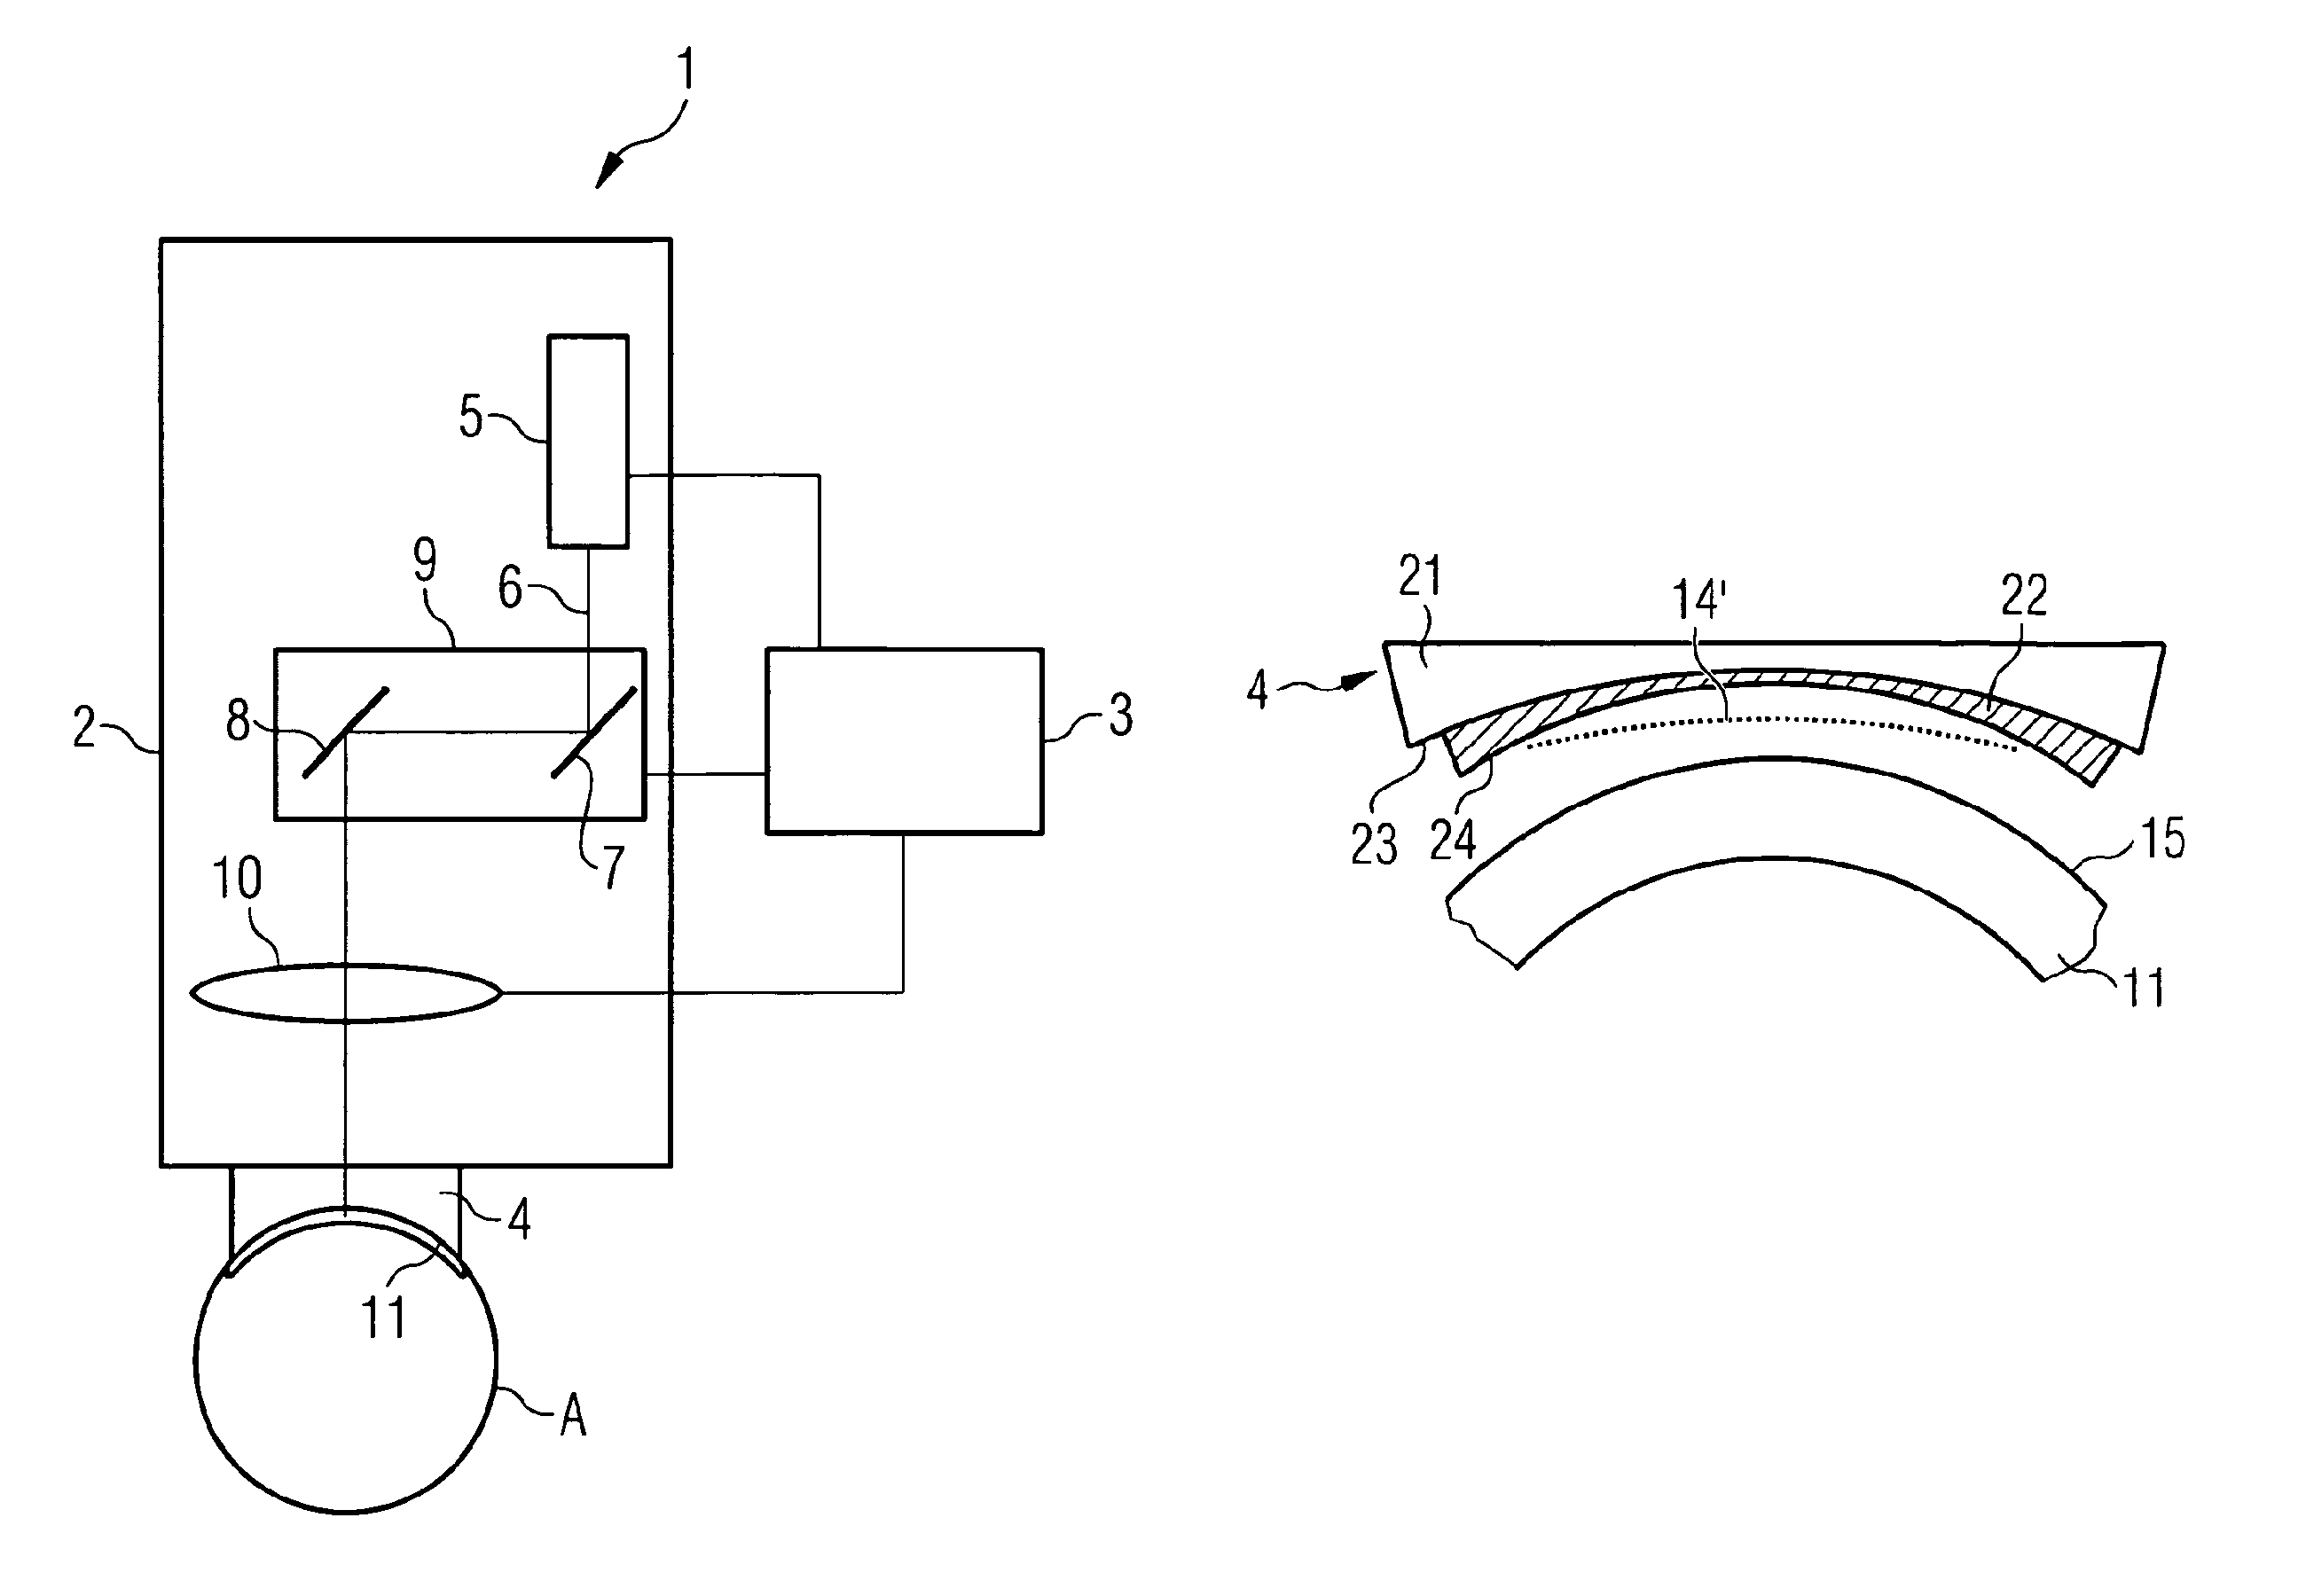 Apparatus for generating a correcting cut surface in the cornea of an eye so as to correct ametropia as well as a contact element for such apparatus